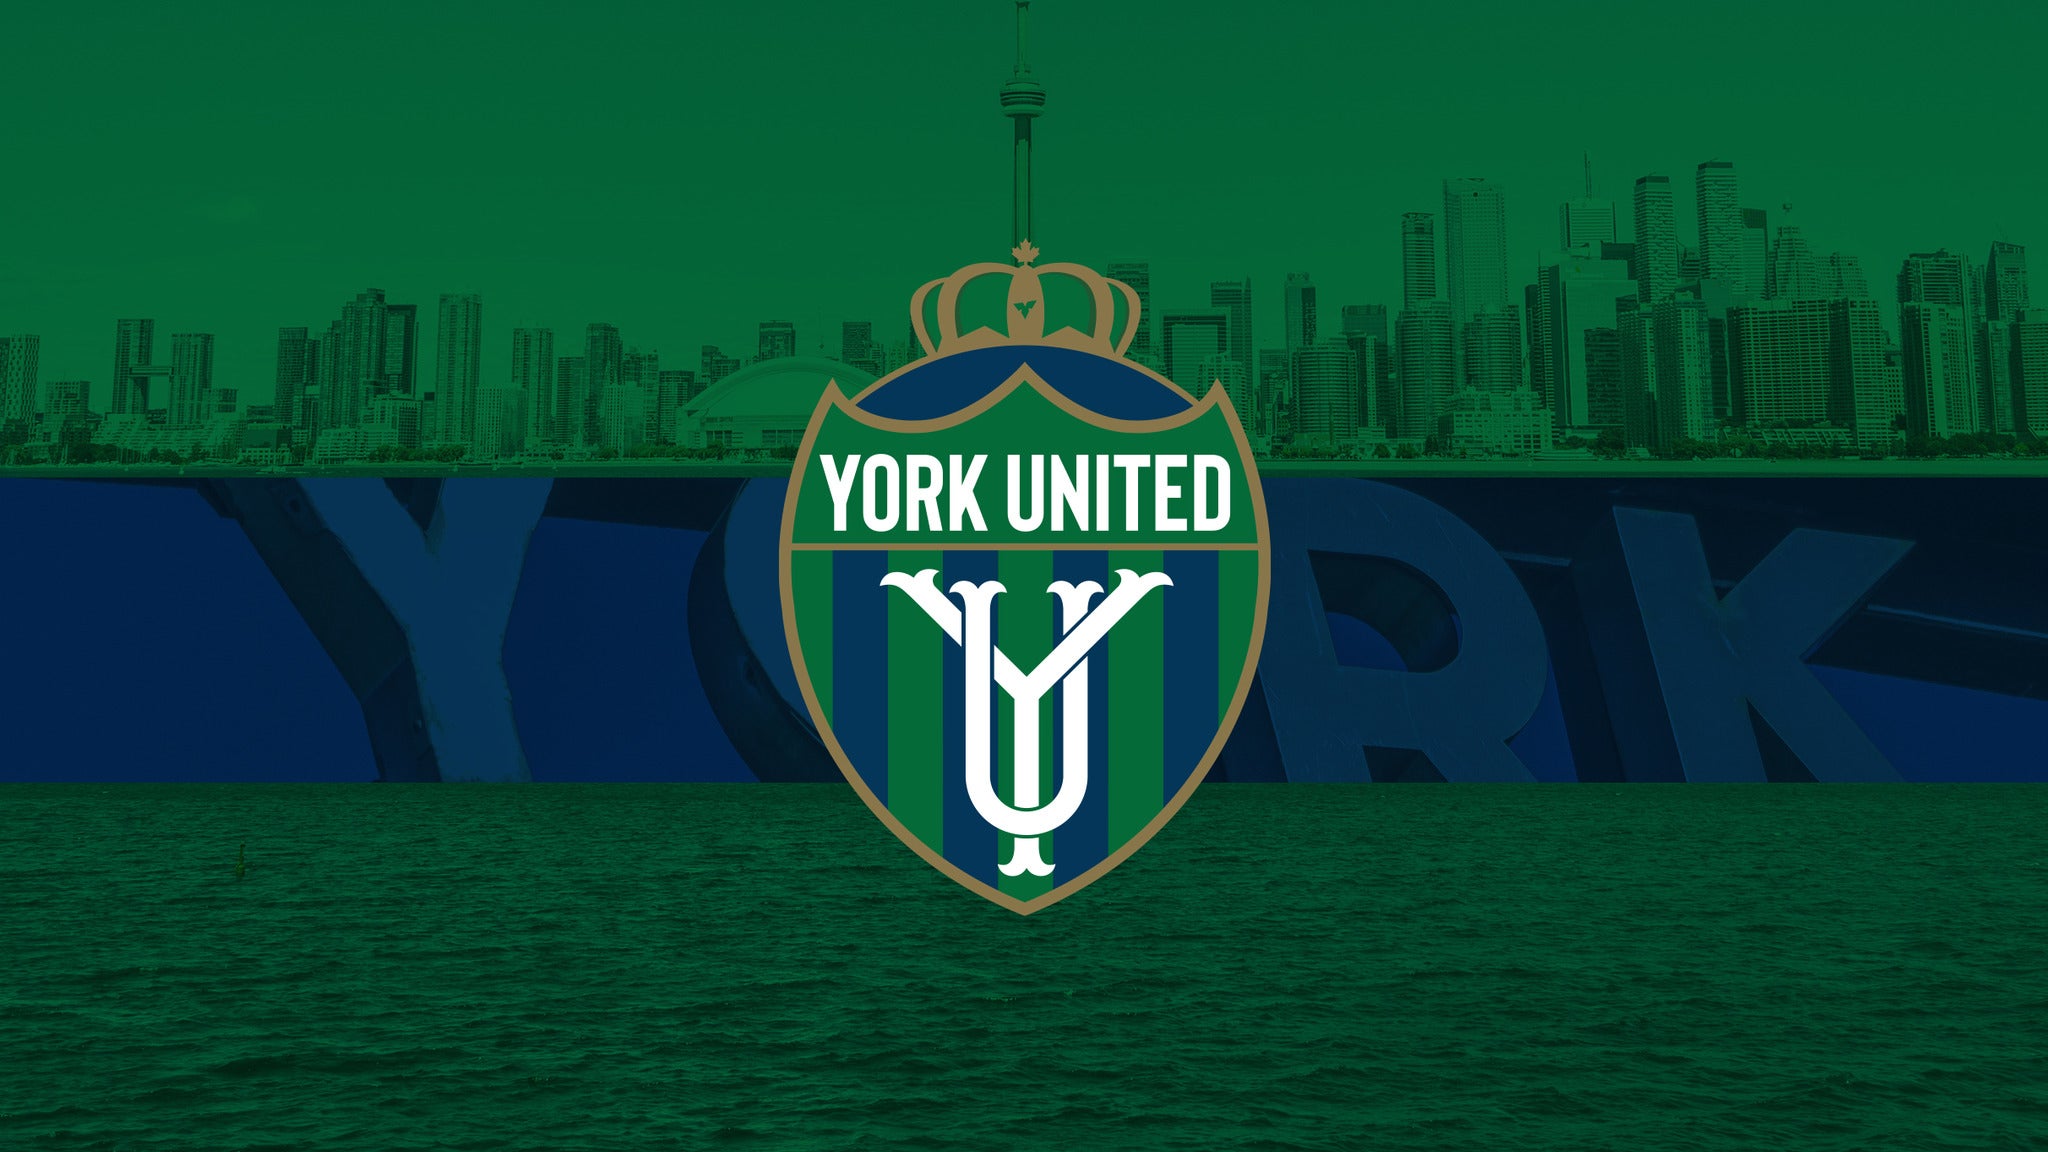 Image used with permission from Ticketmaster | York United FC vs. HFX Wanderers FC tickets